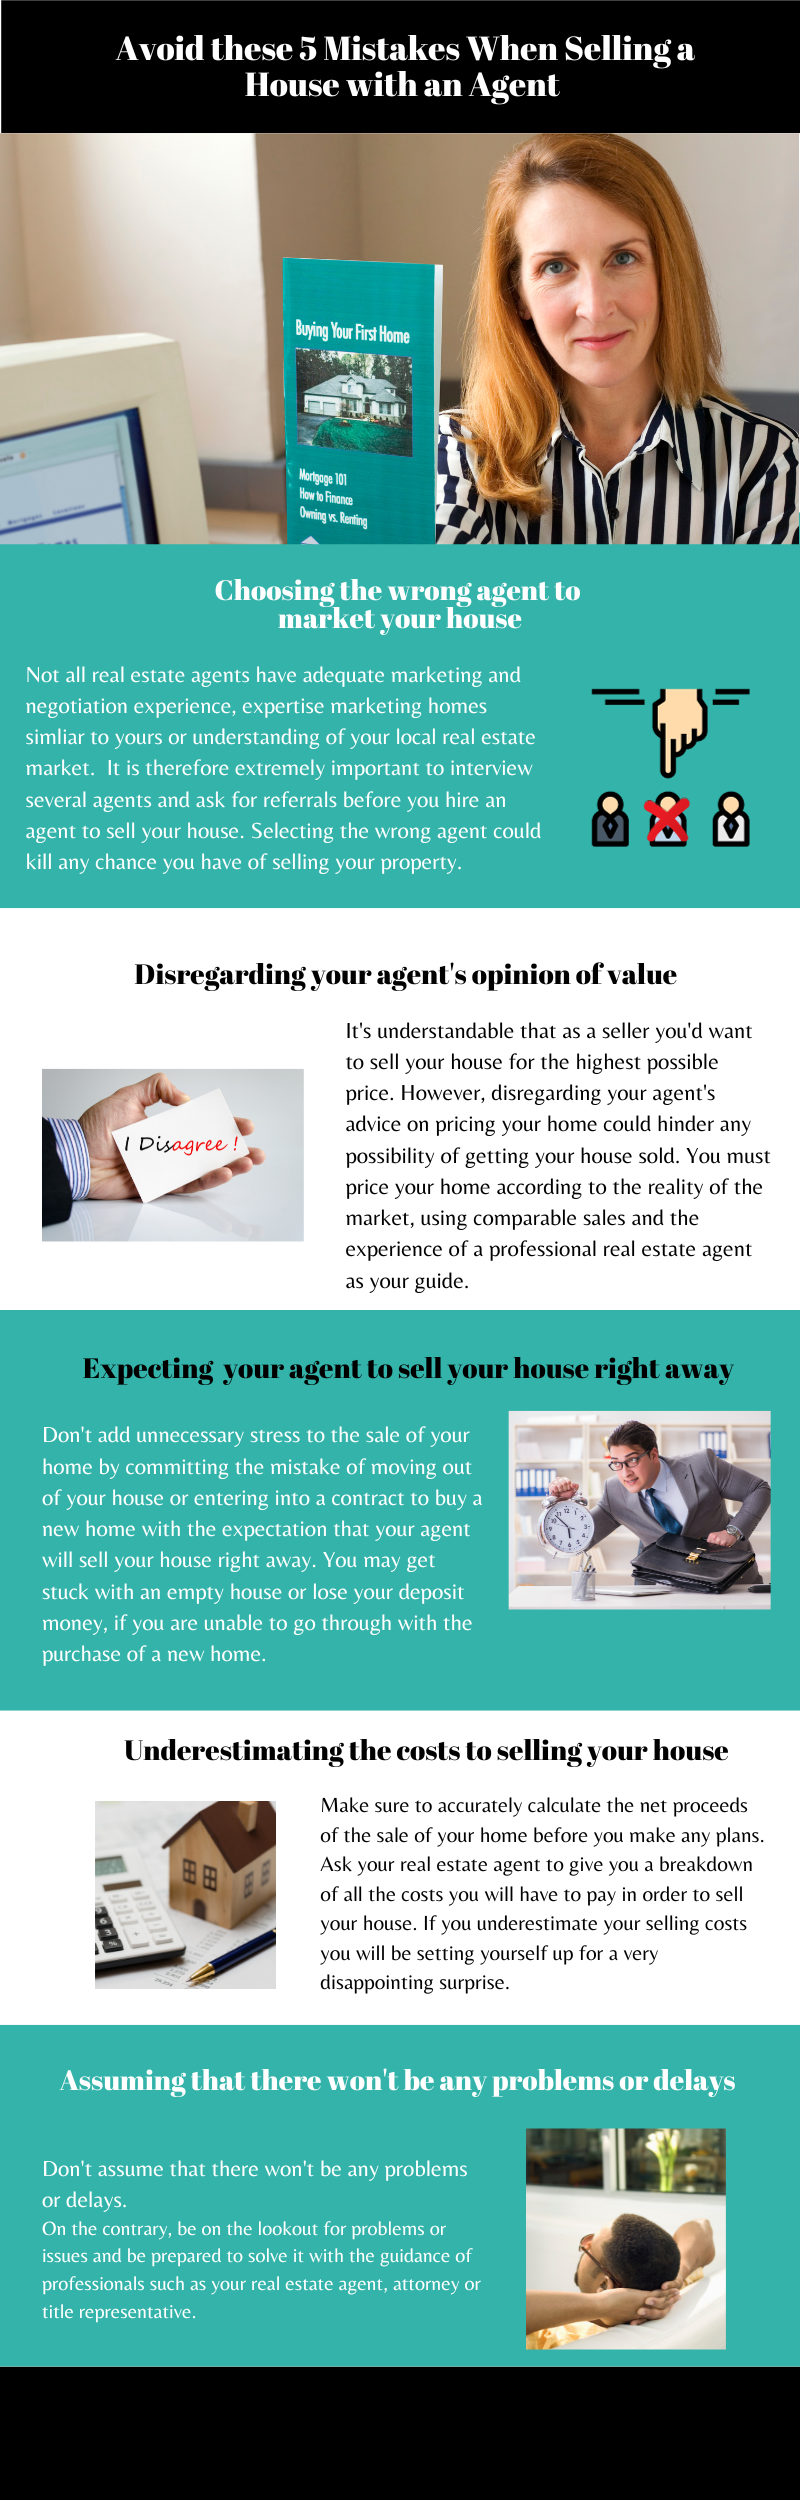 Avoid these 5 mistakes when selling a house with an agent